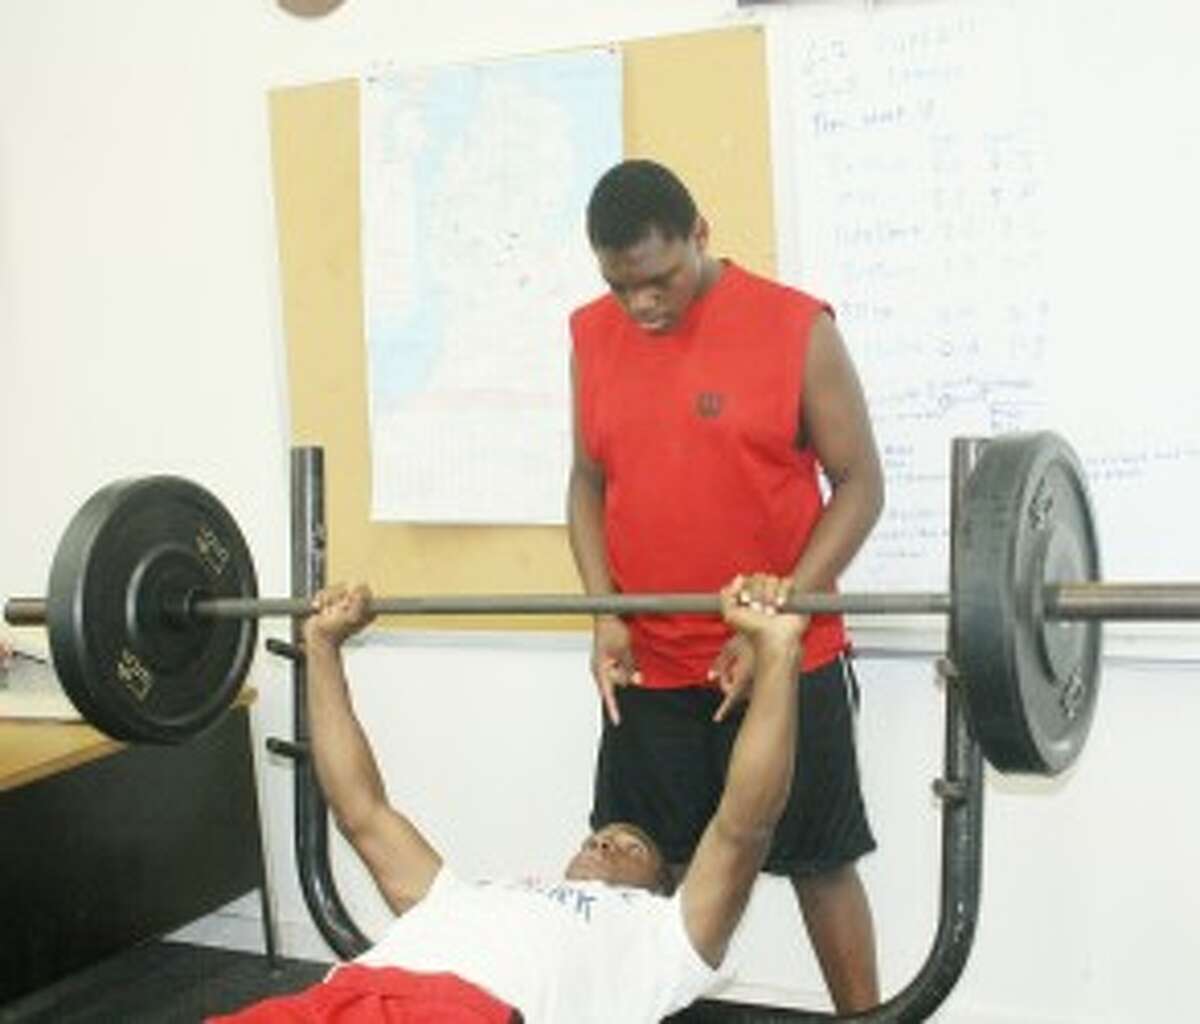 AT WORK: Dashawn Moore works out in the Baldwin weight room while La'Kie Donald watches. (Pioneer photo/John Raffel)